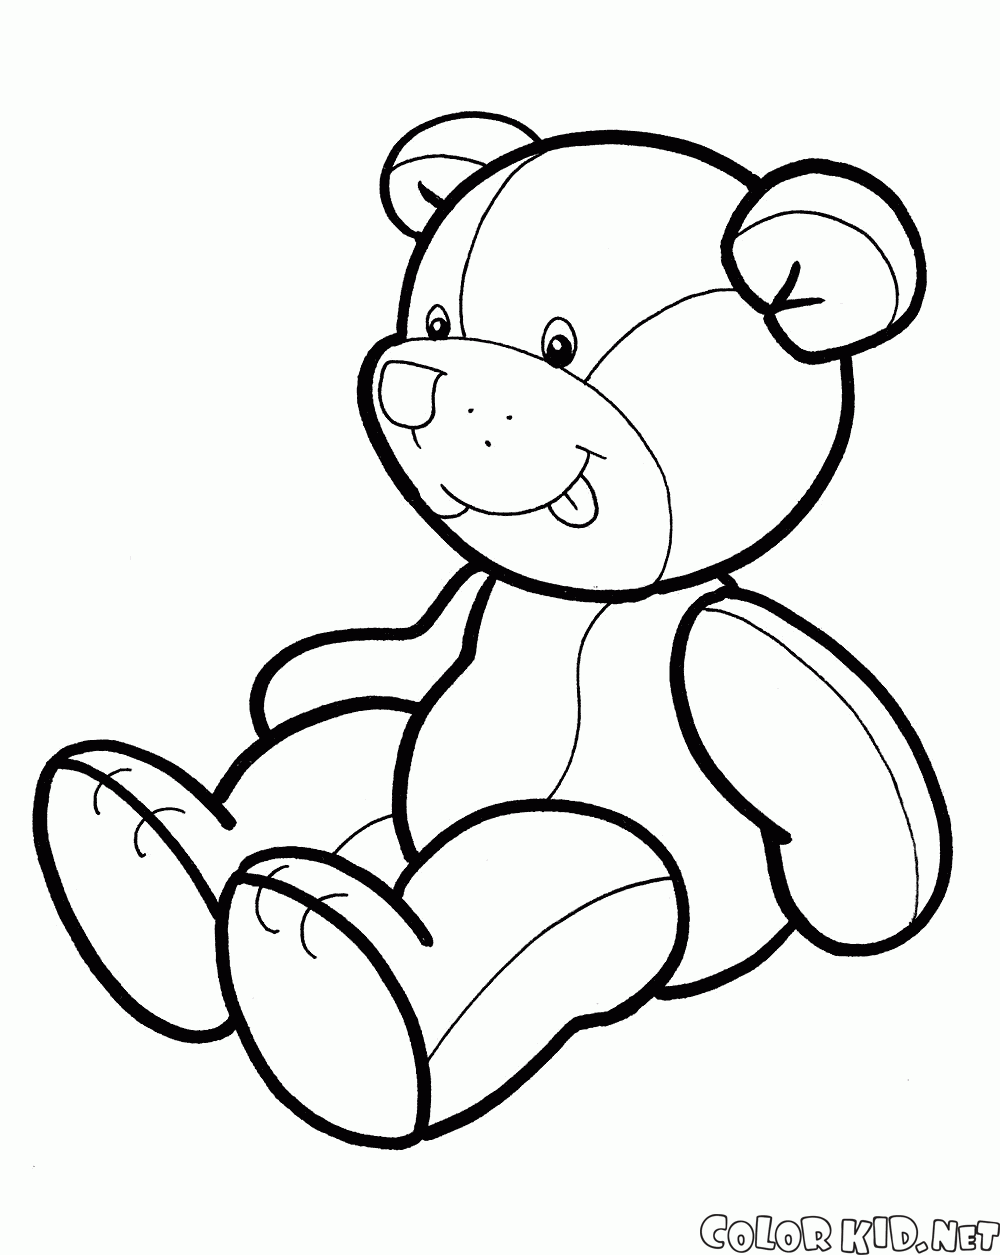 Coloring page - Teddy bear